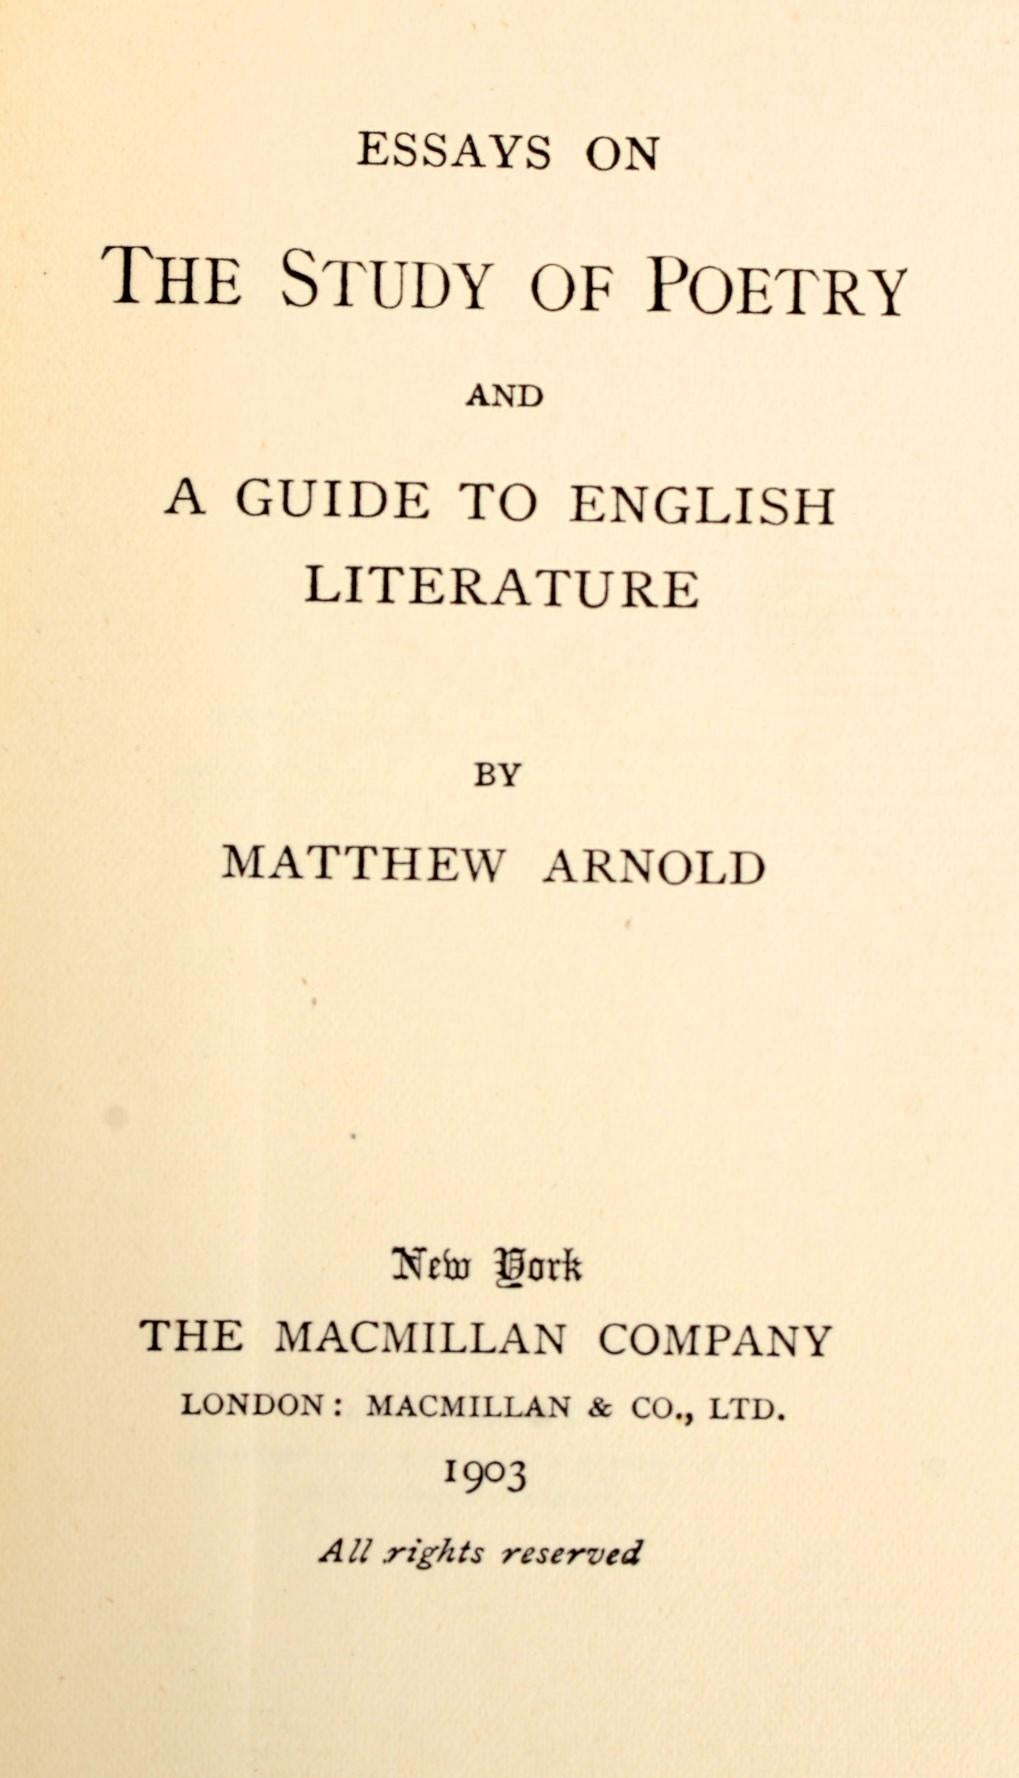 Essays on the Study of Poetry and a Guide to English Literature By Matthew Arnold. Macmillan Company, 1903. 1st Ed Thus gilt decorated hardcover. 